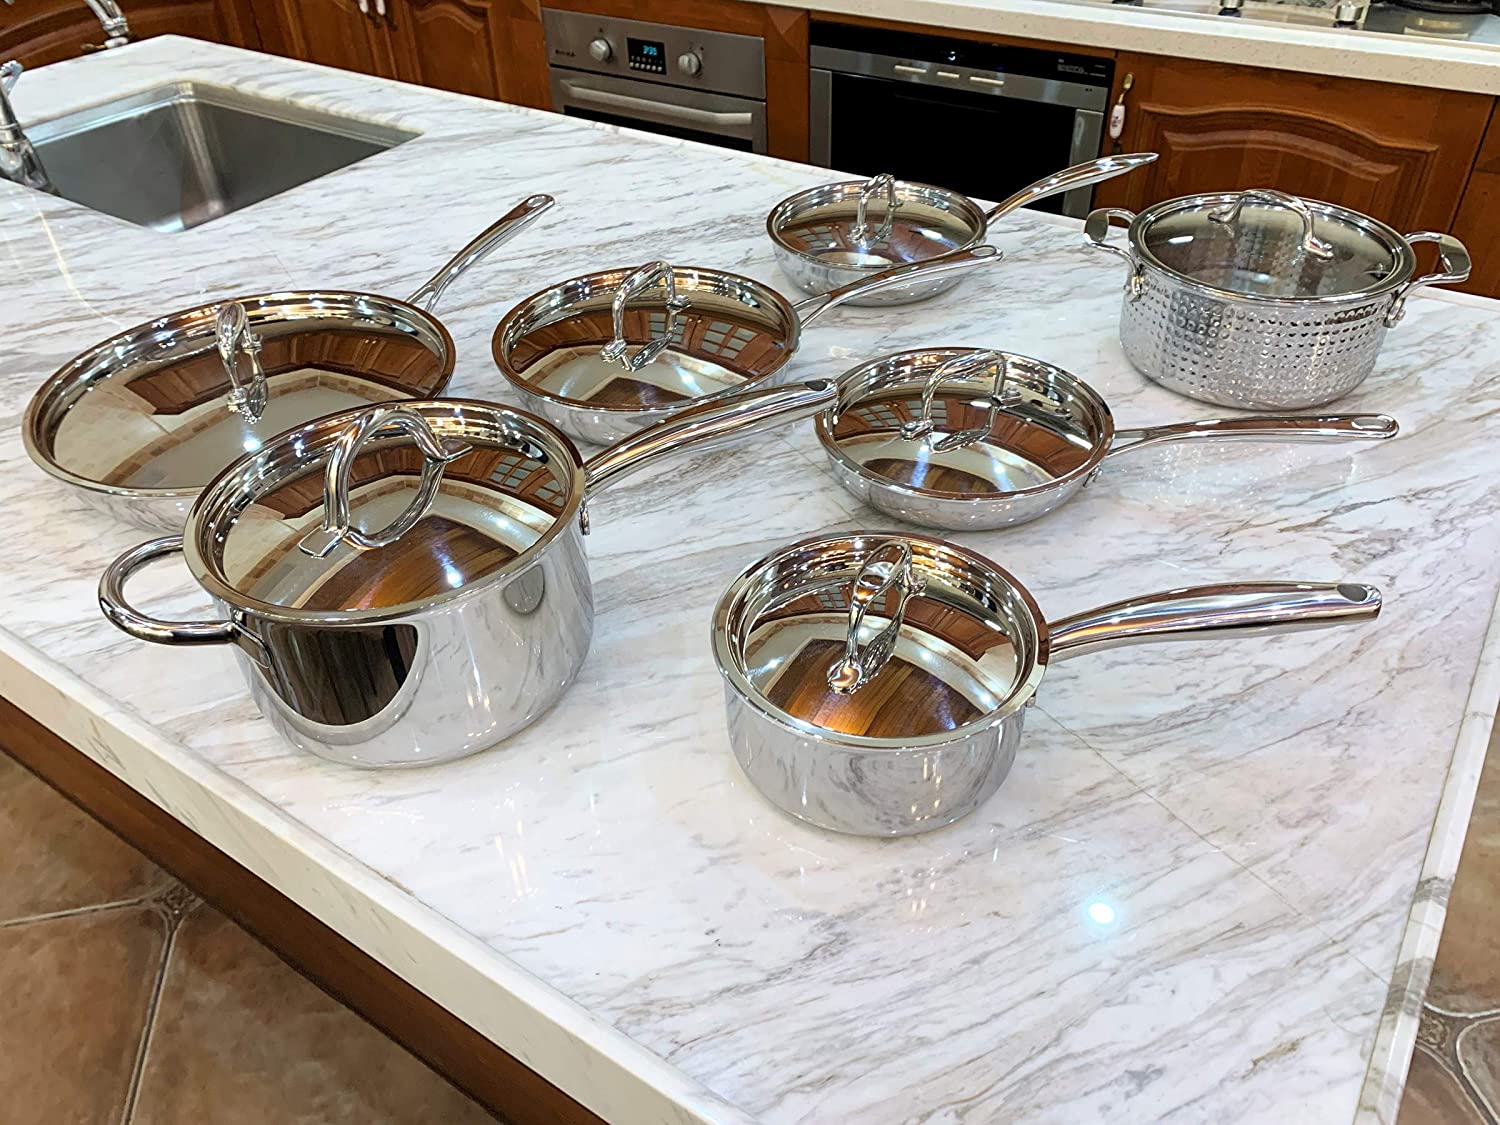 Lot - Magnalite Pots, Fish Tray, Stainless Steel Trays